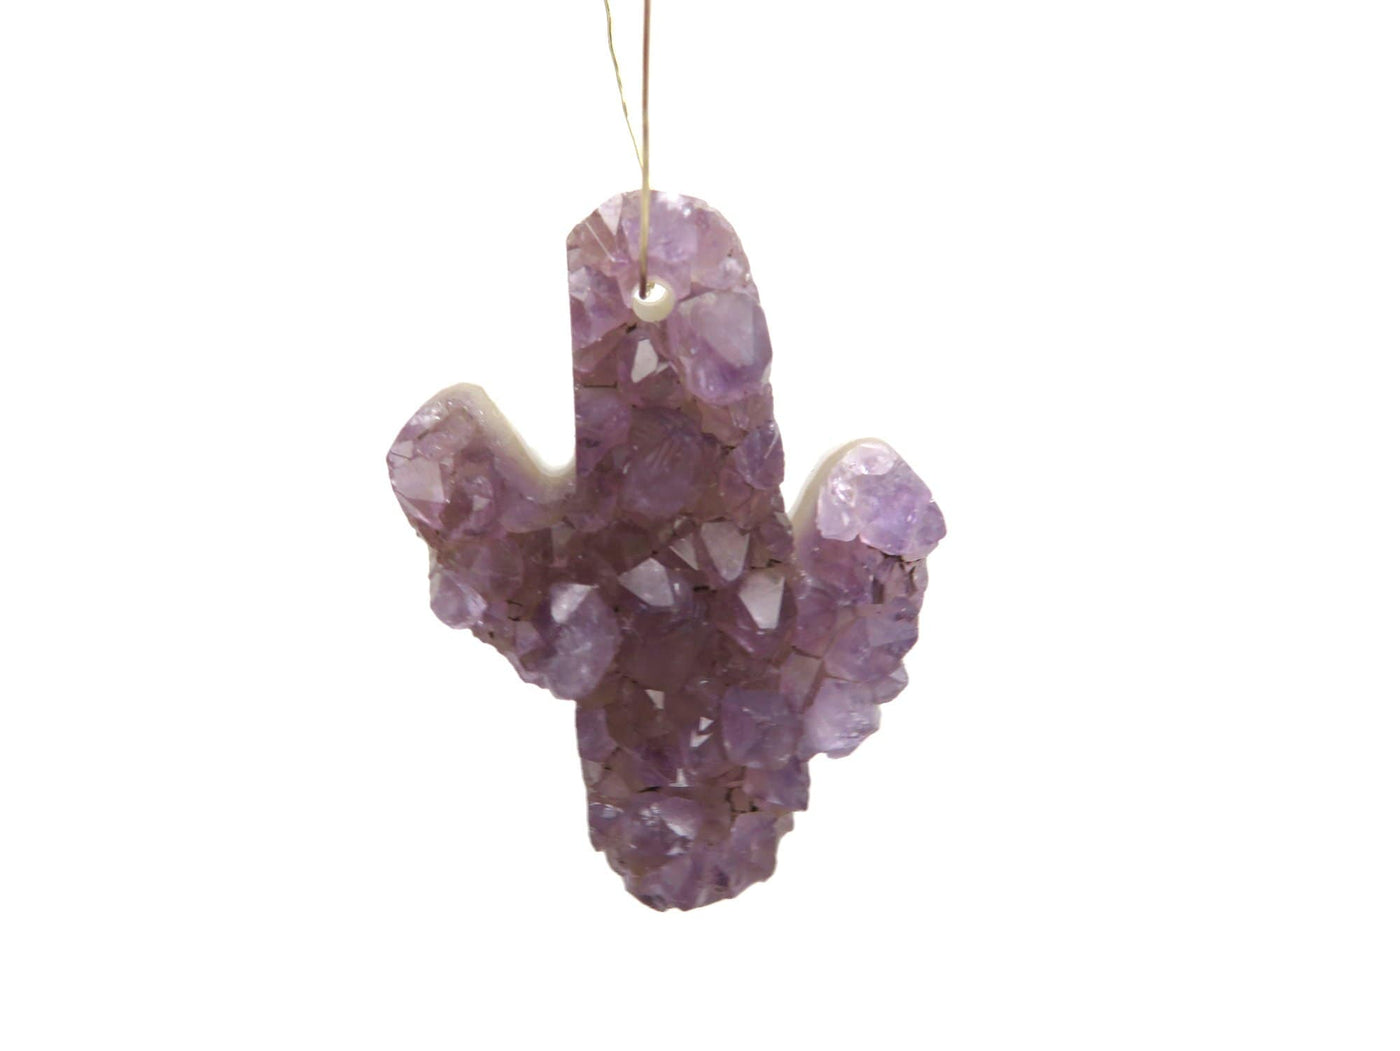 Single amethyst cactus displayed on a white background. 